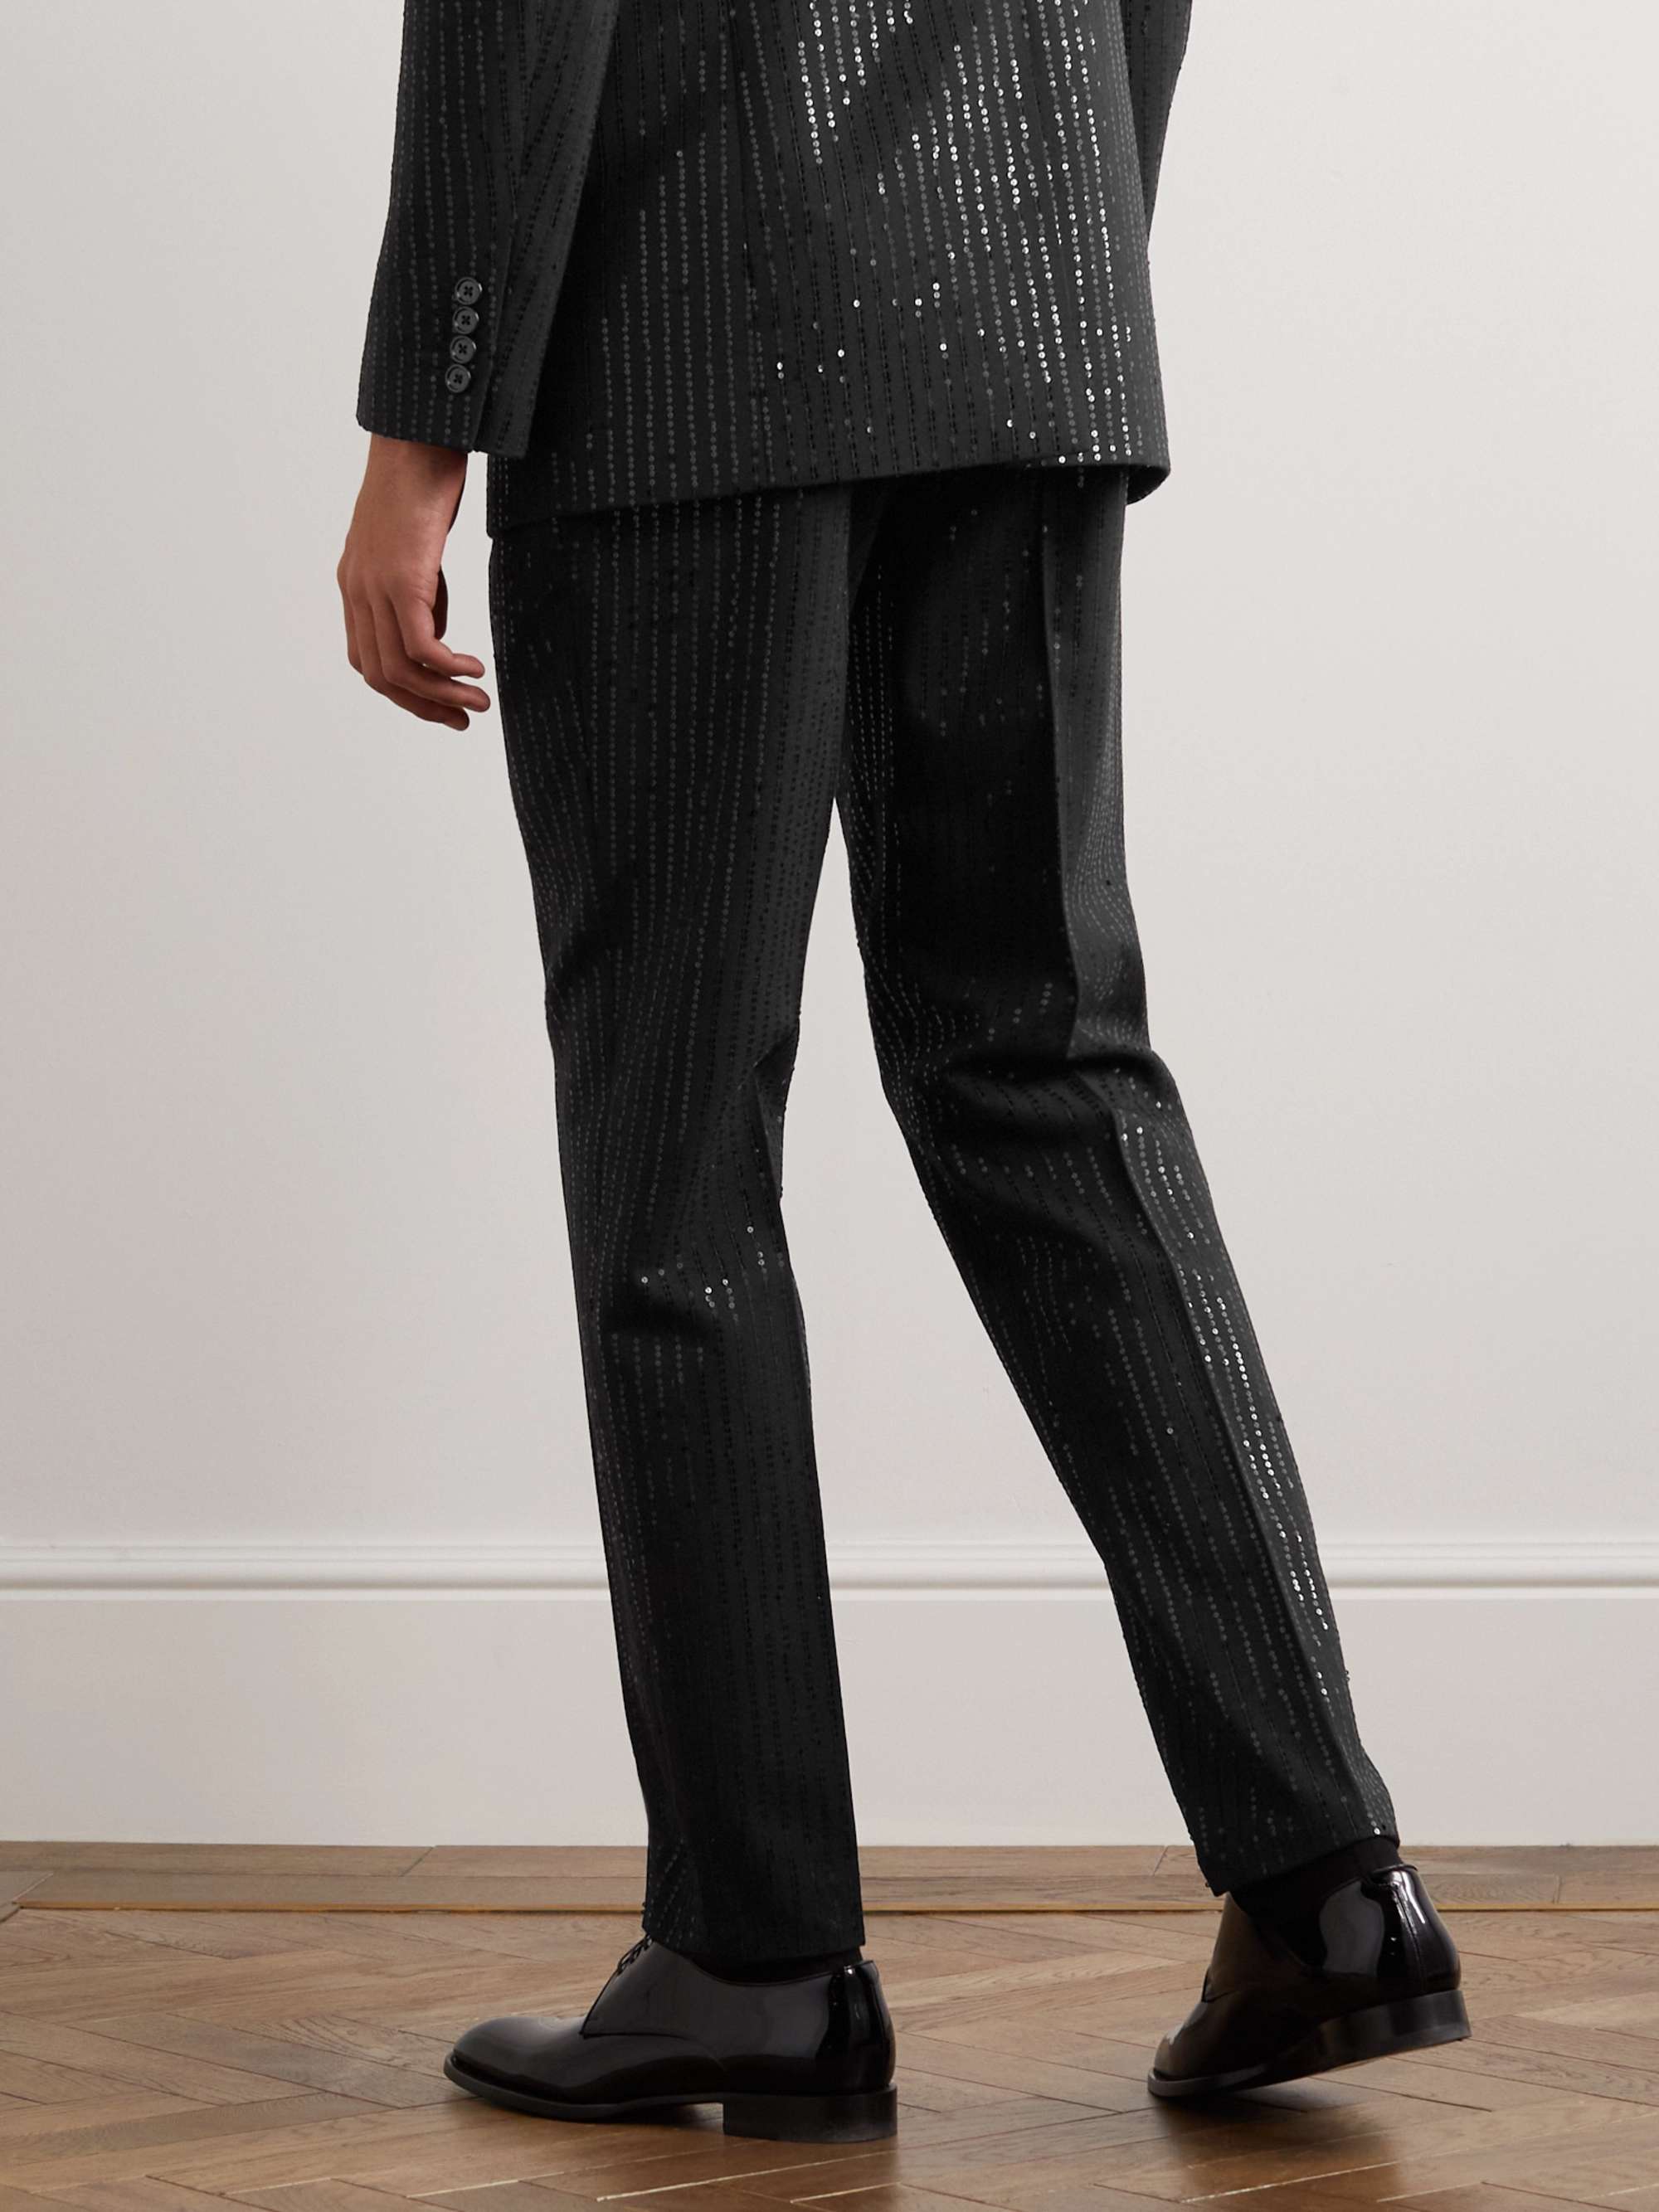 CELINE HOMME Straight-Leg Striped Sequin-Embellished Wool Trousers